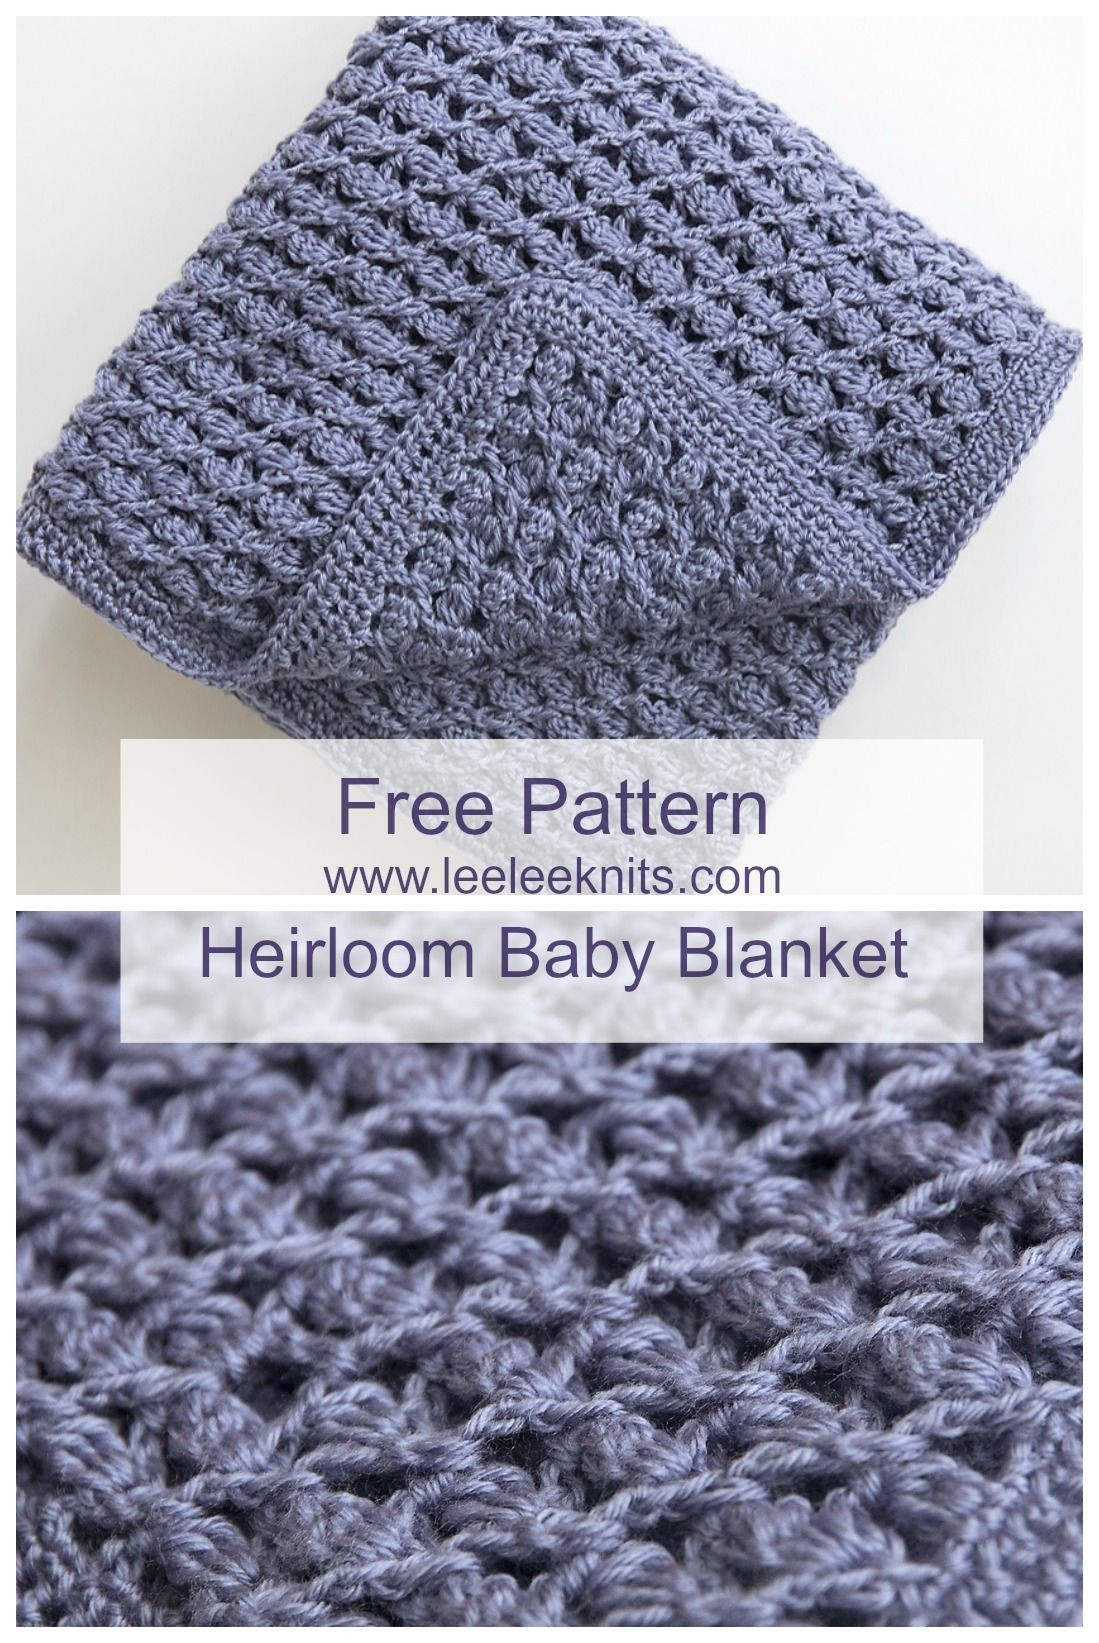 Knitting Patterns For Baby Blankets Free Fresh Ba Blanket Knitting Patterns Free Downloads 2018 Premery